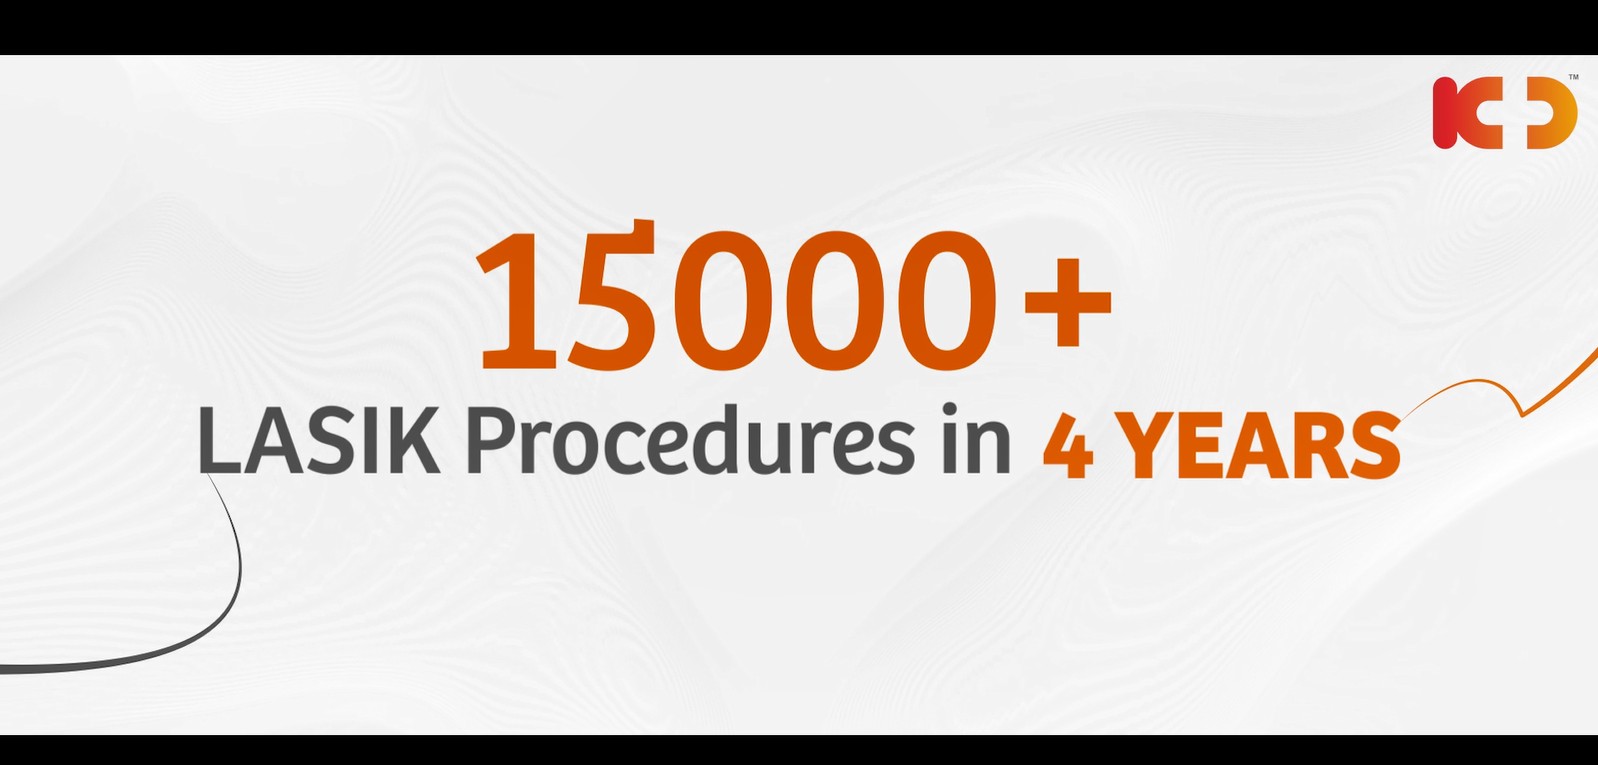 15000+ LASIK procedures - An Eyeconic Achievement

A proud moment for KD Hospital's Ophthalmology Department! With the support of our patients & Medical teams, we have successfully completed 15,000 LASIK procedures in 4 years. The 